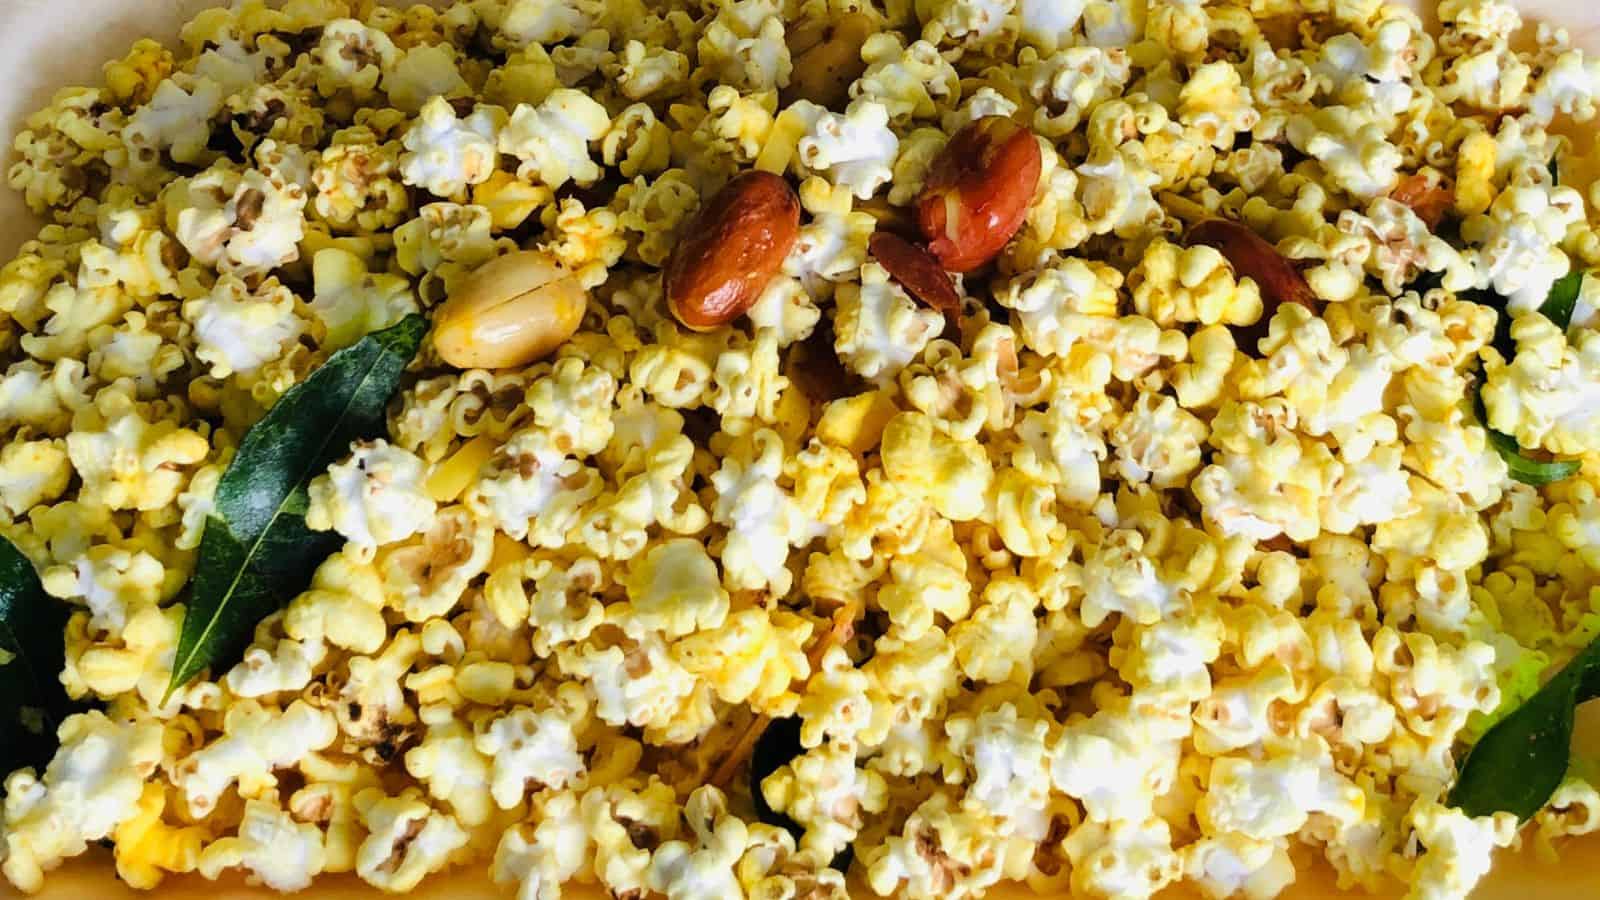 A bowl of spiced popcorn mixed with nuts and curry leaves.